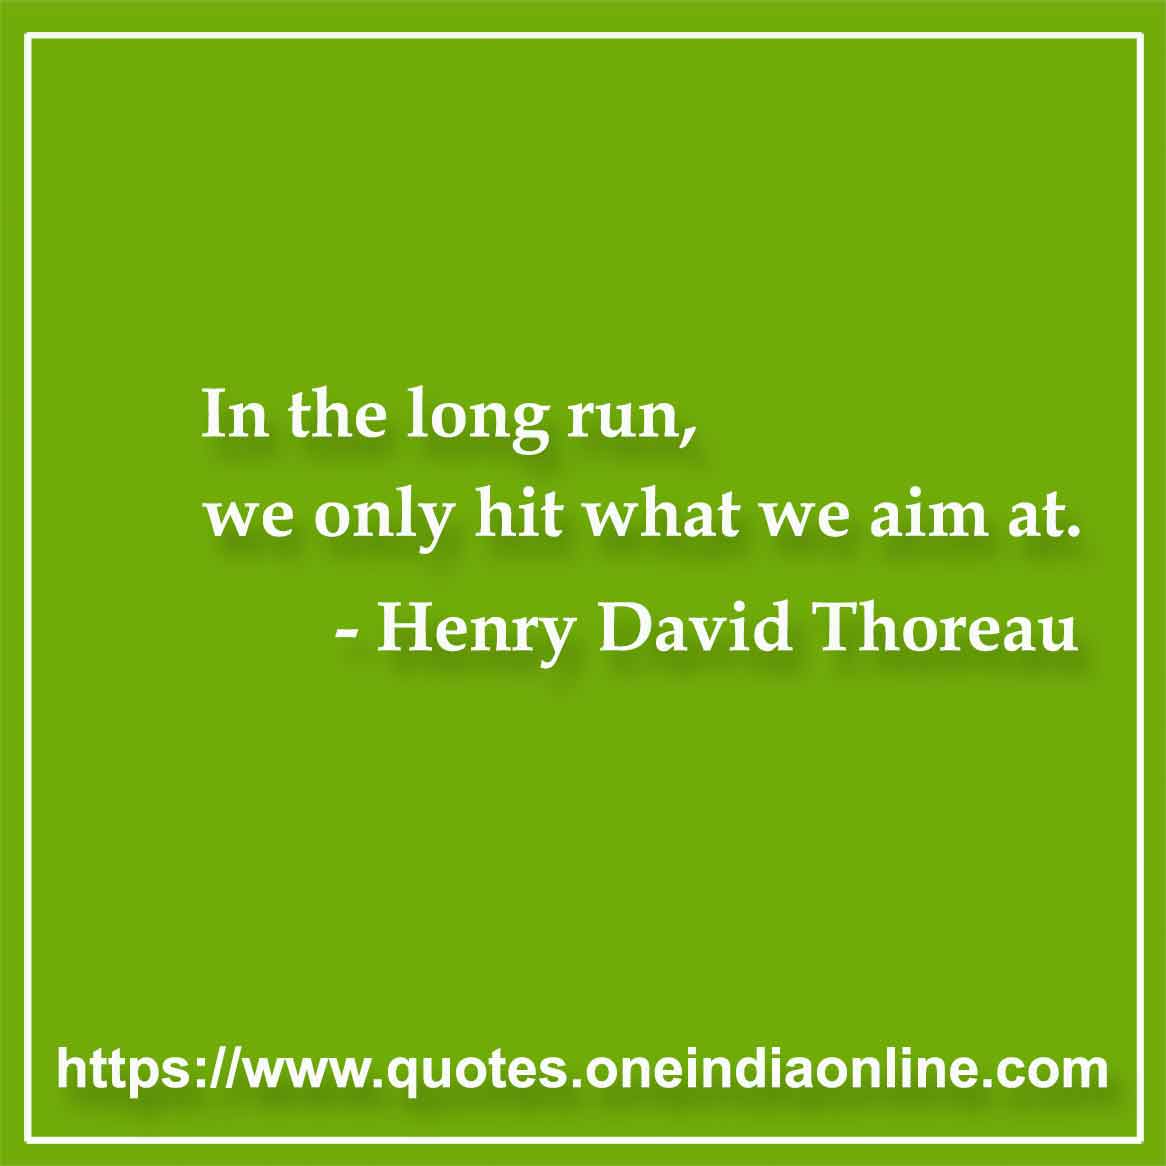 In the long run, we only hit what we aim at.

-  Henry David Thoreau